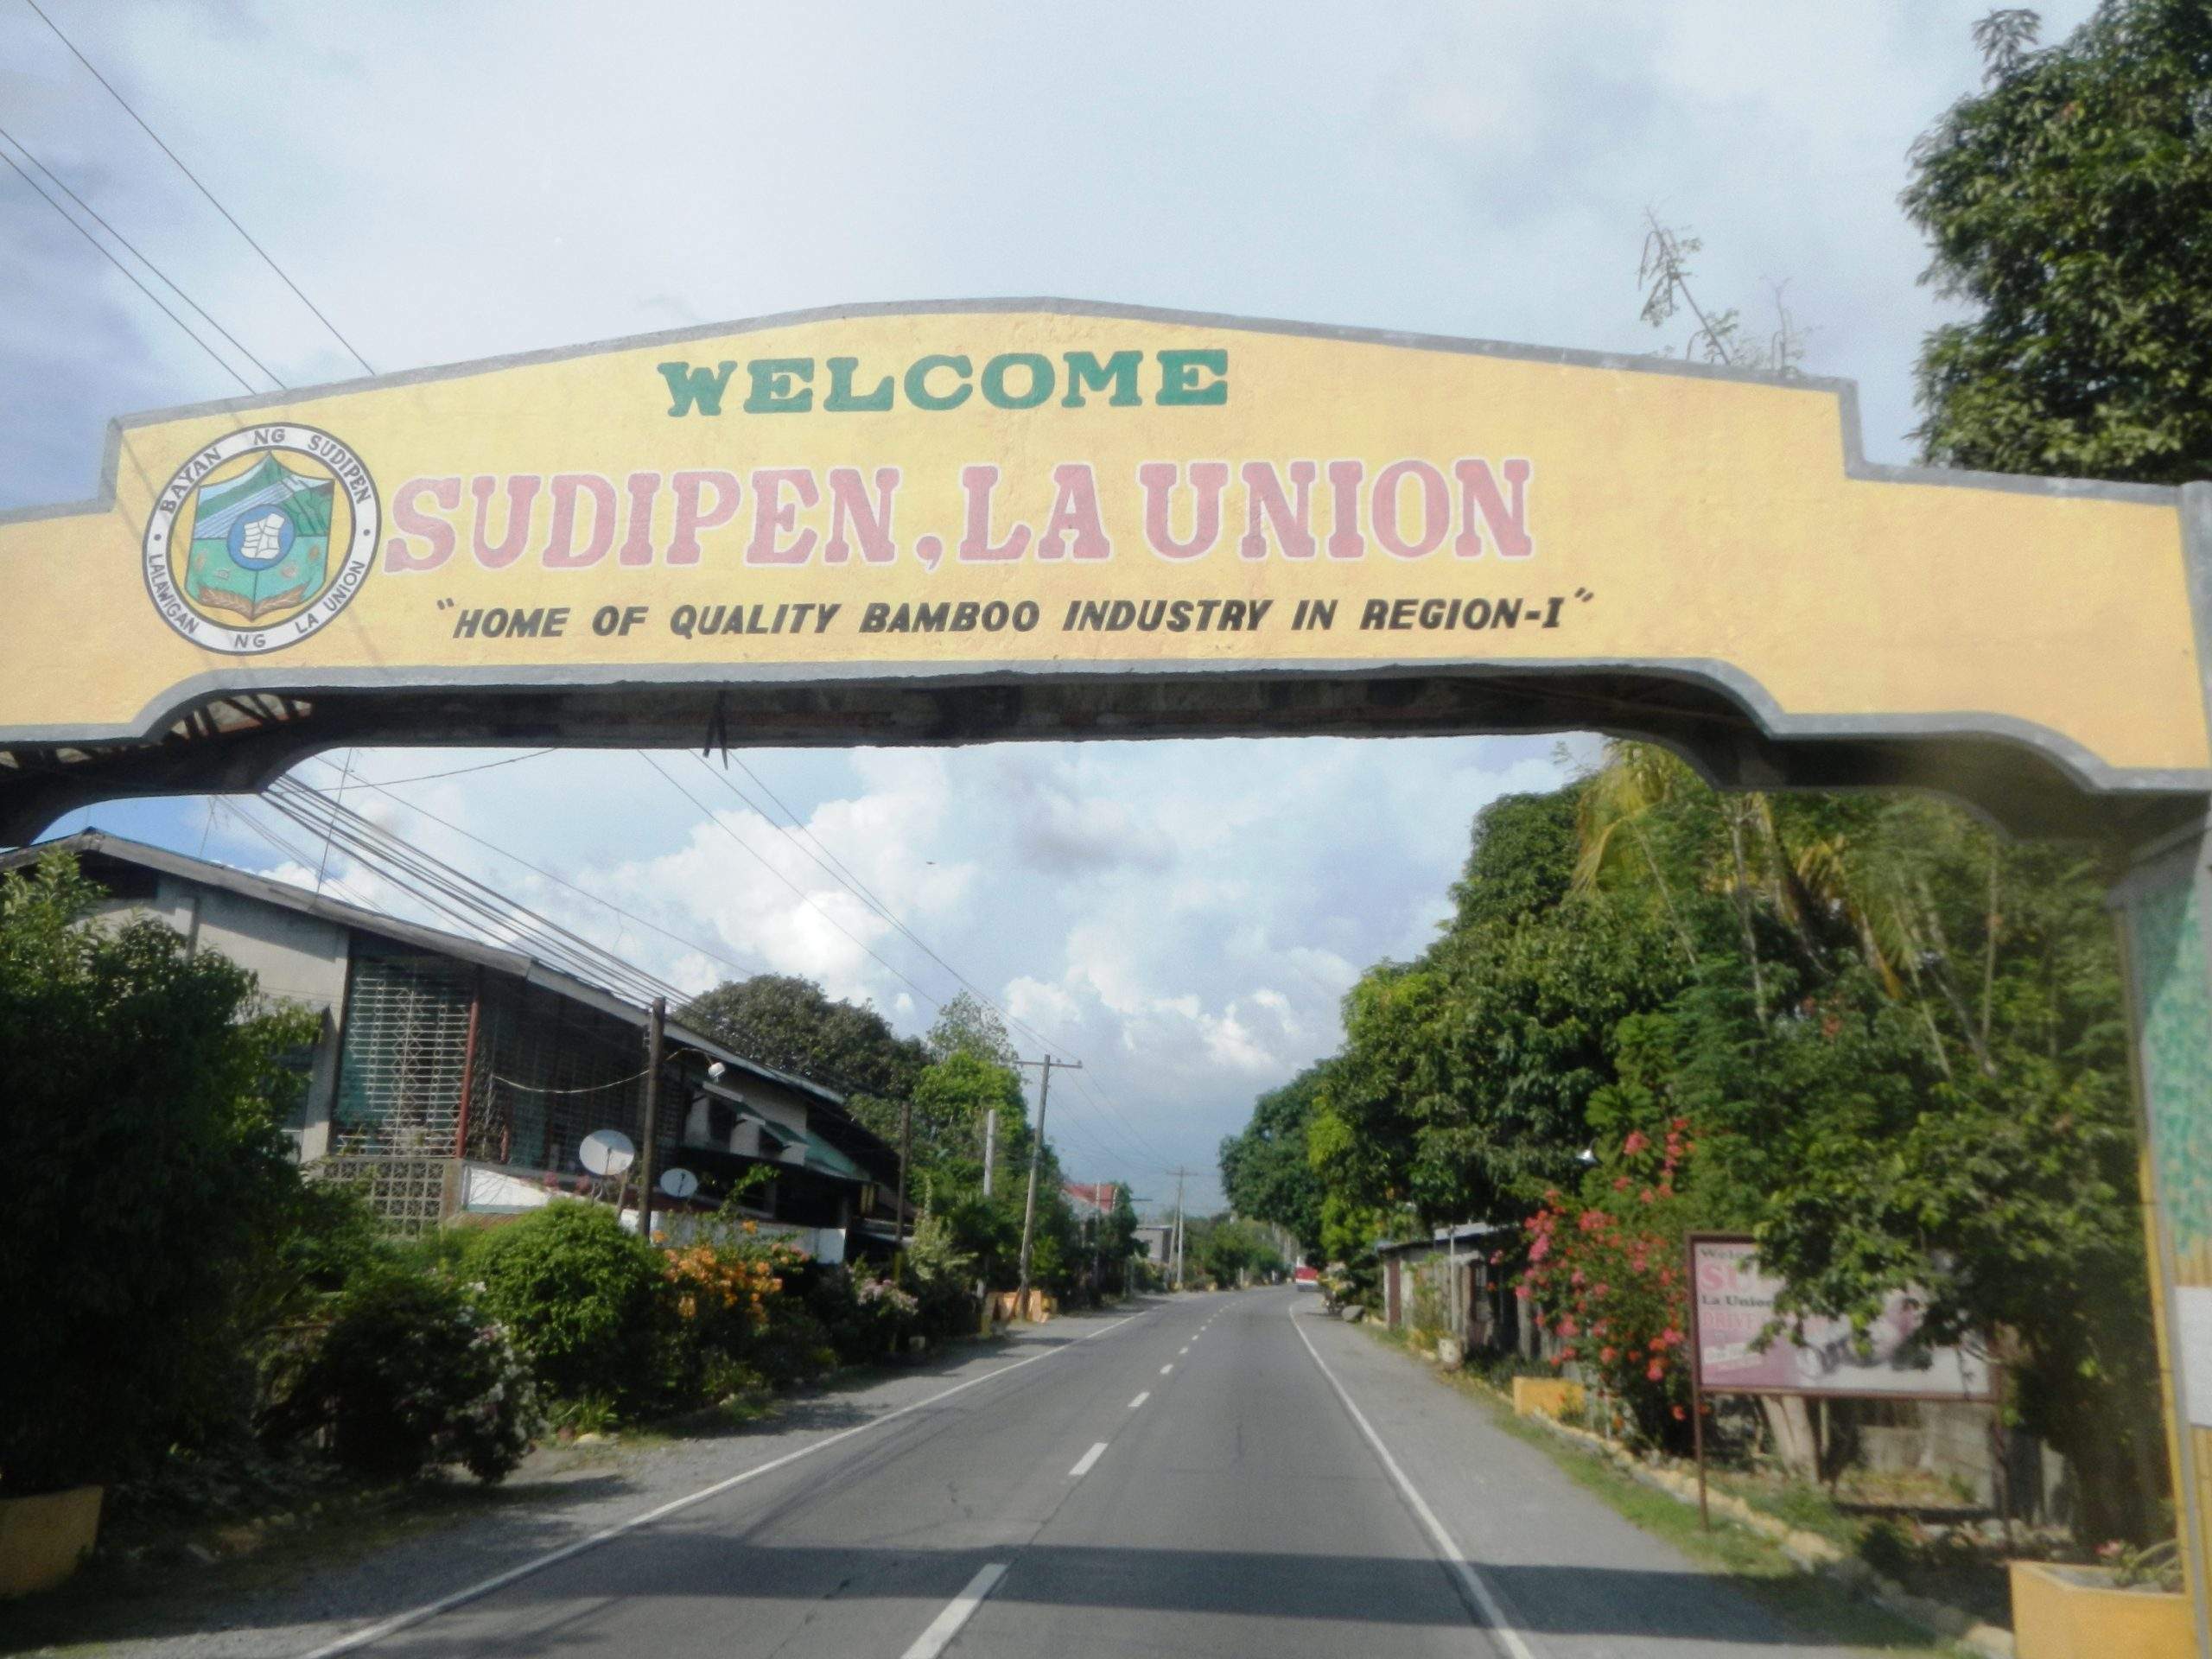 La Union Province: Surf, Culture & Beauty in the Philippines